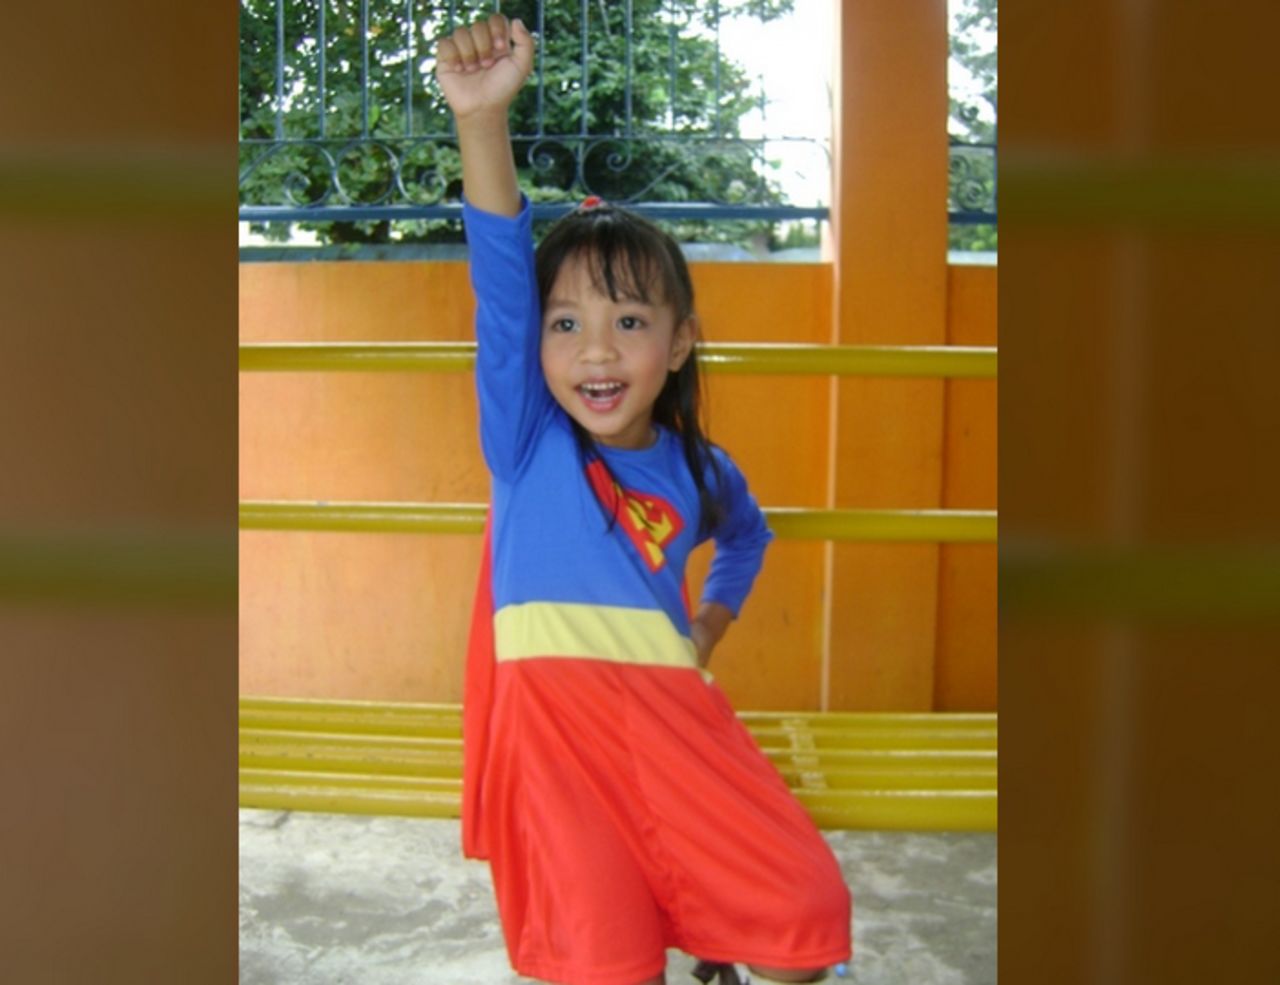 <a href="http://ireport.cnn.com/docs/DOC-979832">Socrates Ballais</a> photographed his daughter, Iyah, dressed as "Supergirl" for a school presentation. Both he and his daughter are huge superhero fans.  When Iyah wears the Superman cape, she believes she really has superpowers. "She has no fear of heights, and thinks she is as powerful as Superman. I keep on reminding her that acting like Supergirl is just like a pretend play. She does not believe it," he said. "I had to make sure that I am around when she dons the Supergirl attire."